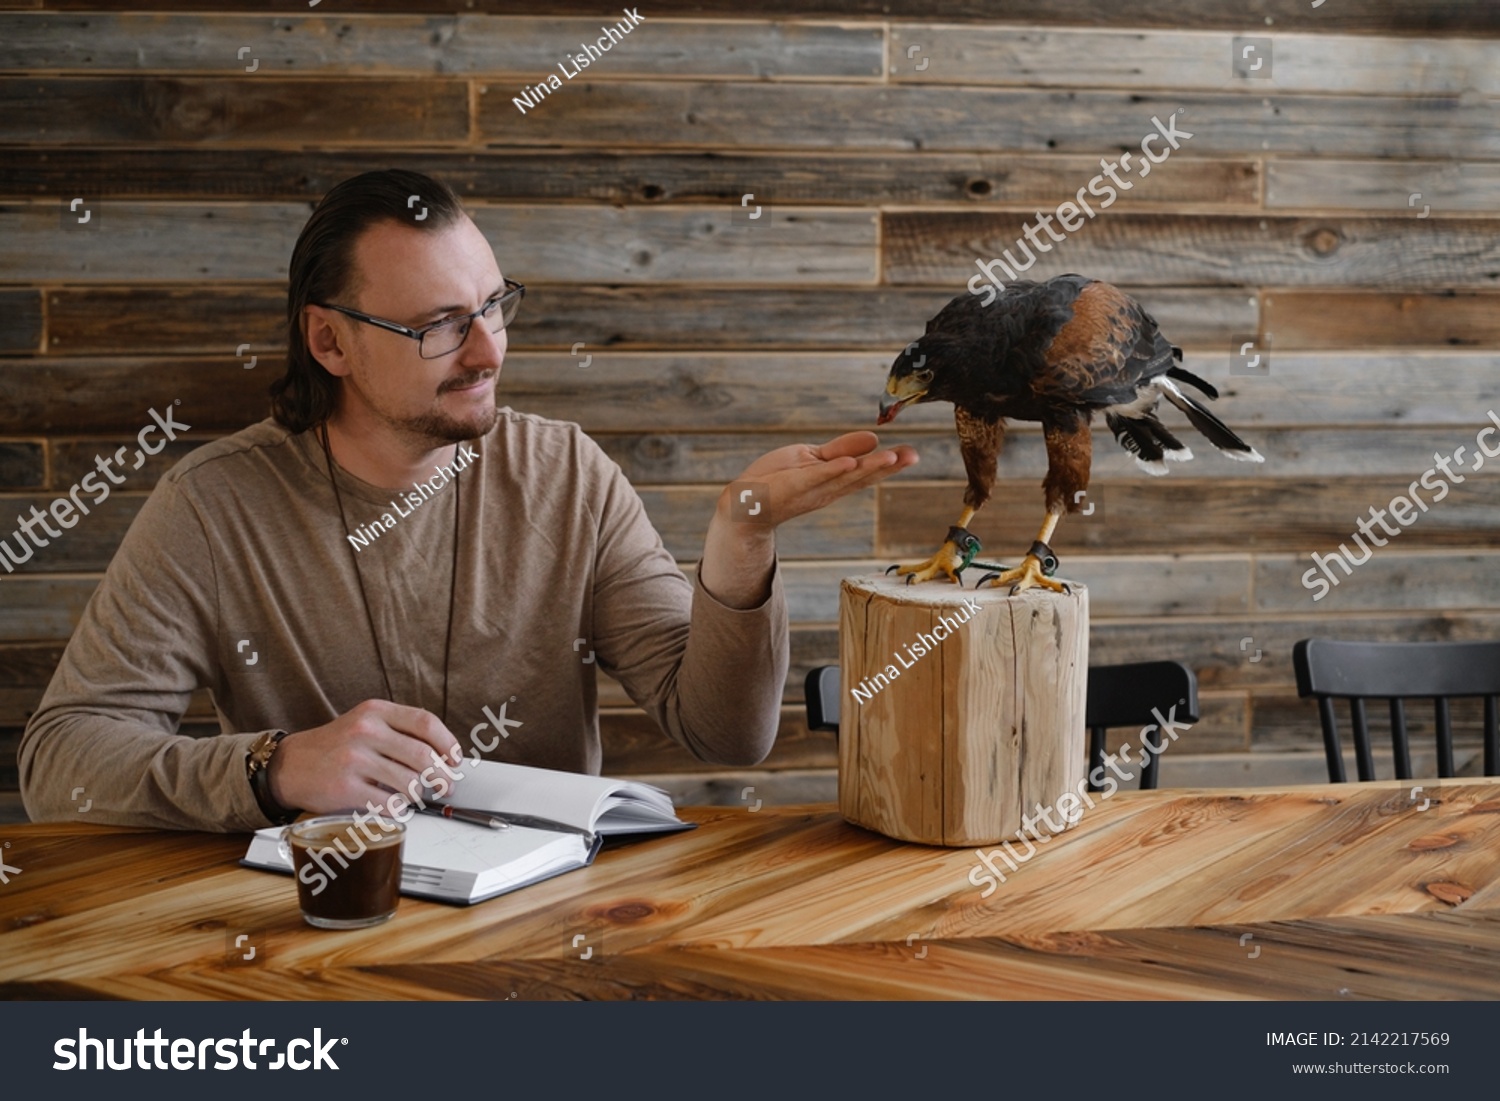 Man is working, writing with wild bird at home by the table. Making noted, memories, diary with eagle as pet. Unusual animals at home. Human friendship. Taking care of buzzard #2142217569